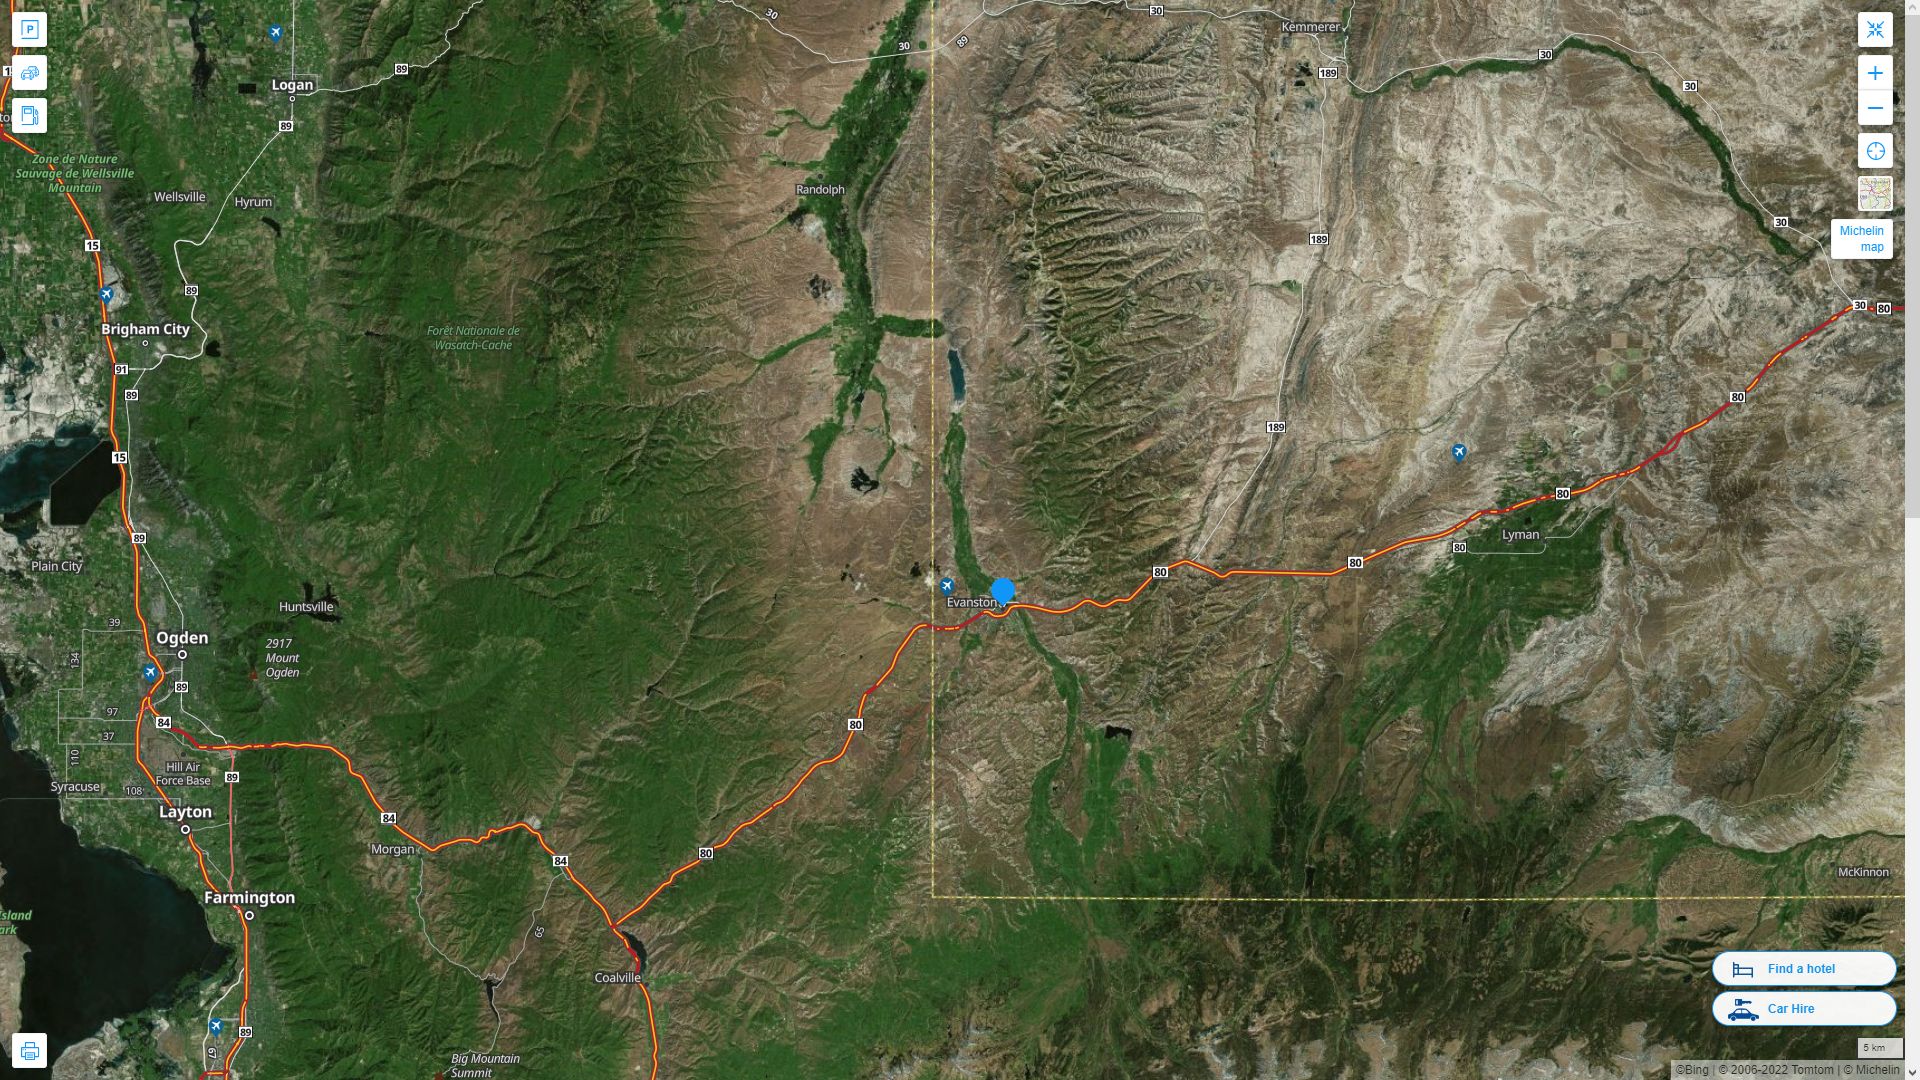 Evanston Wyoming Highway and Road Map with Satellite View